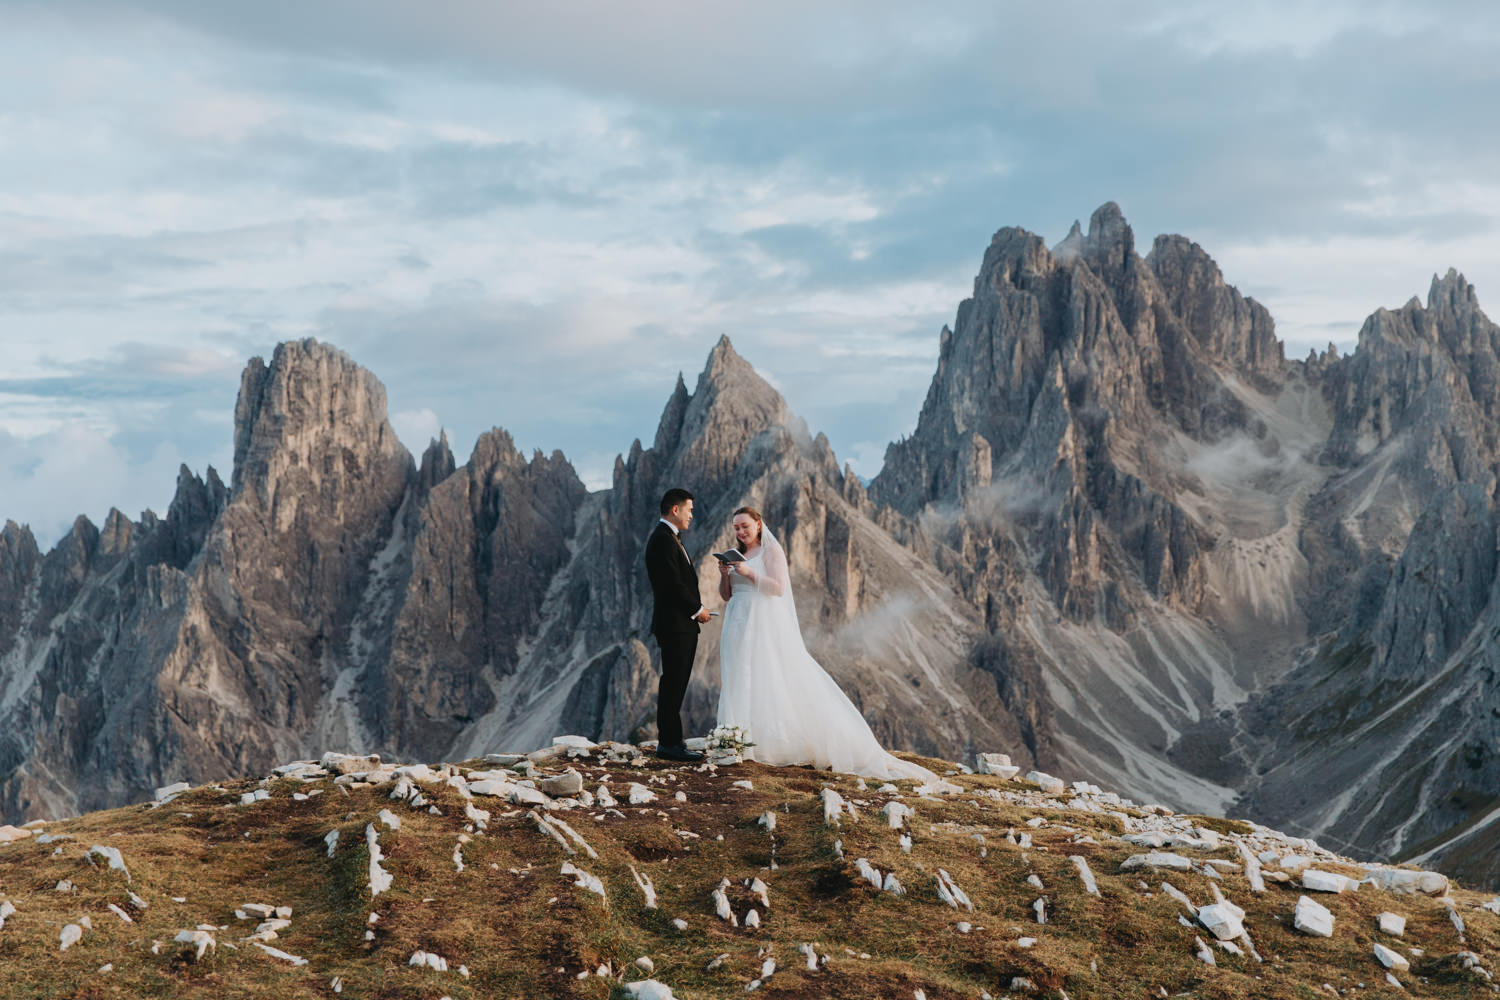 A couple stand in the middle of the frame exchanging wedding vows during their Dolomites elopement. They are framed by the jagged, mist covered mountain peaks of the Cadini di Misurina range in Tre Cime national park.